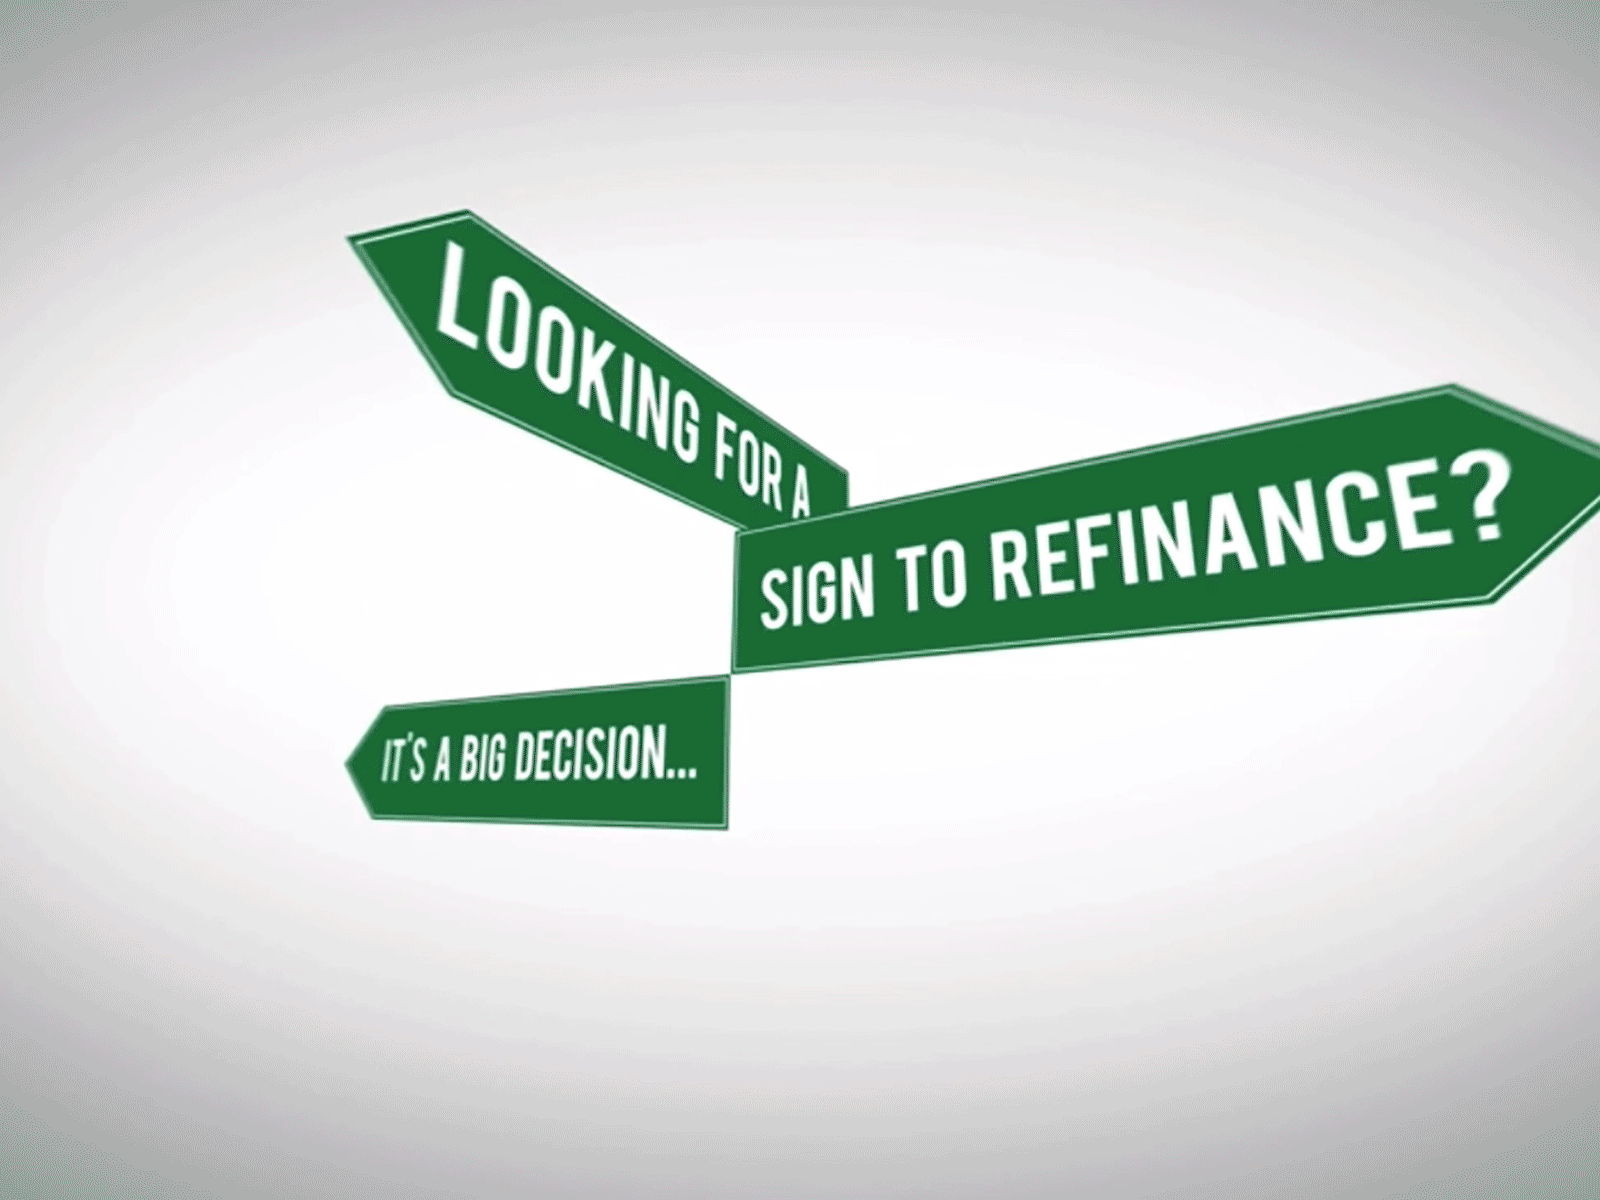 Signs after effects animation